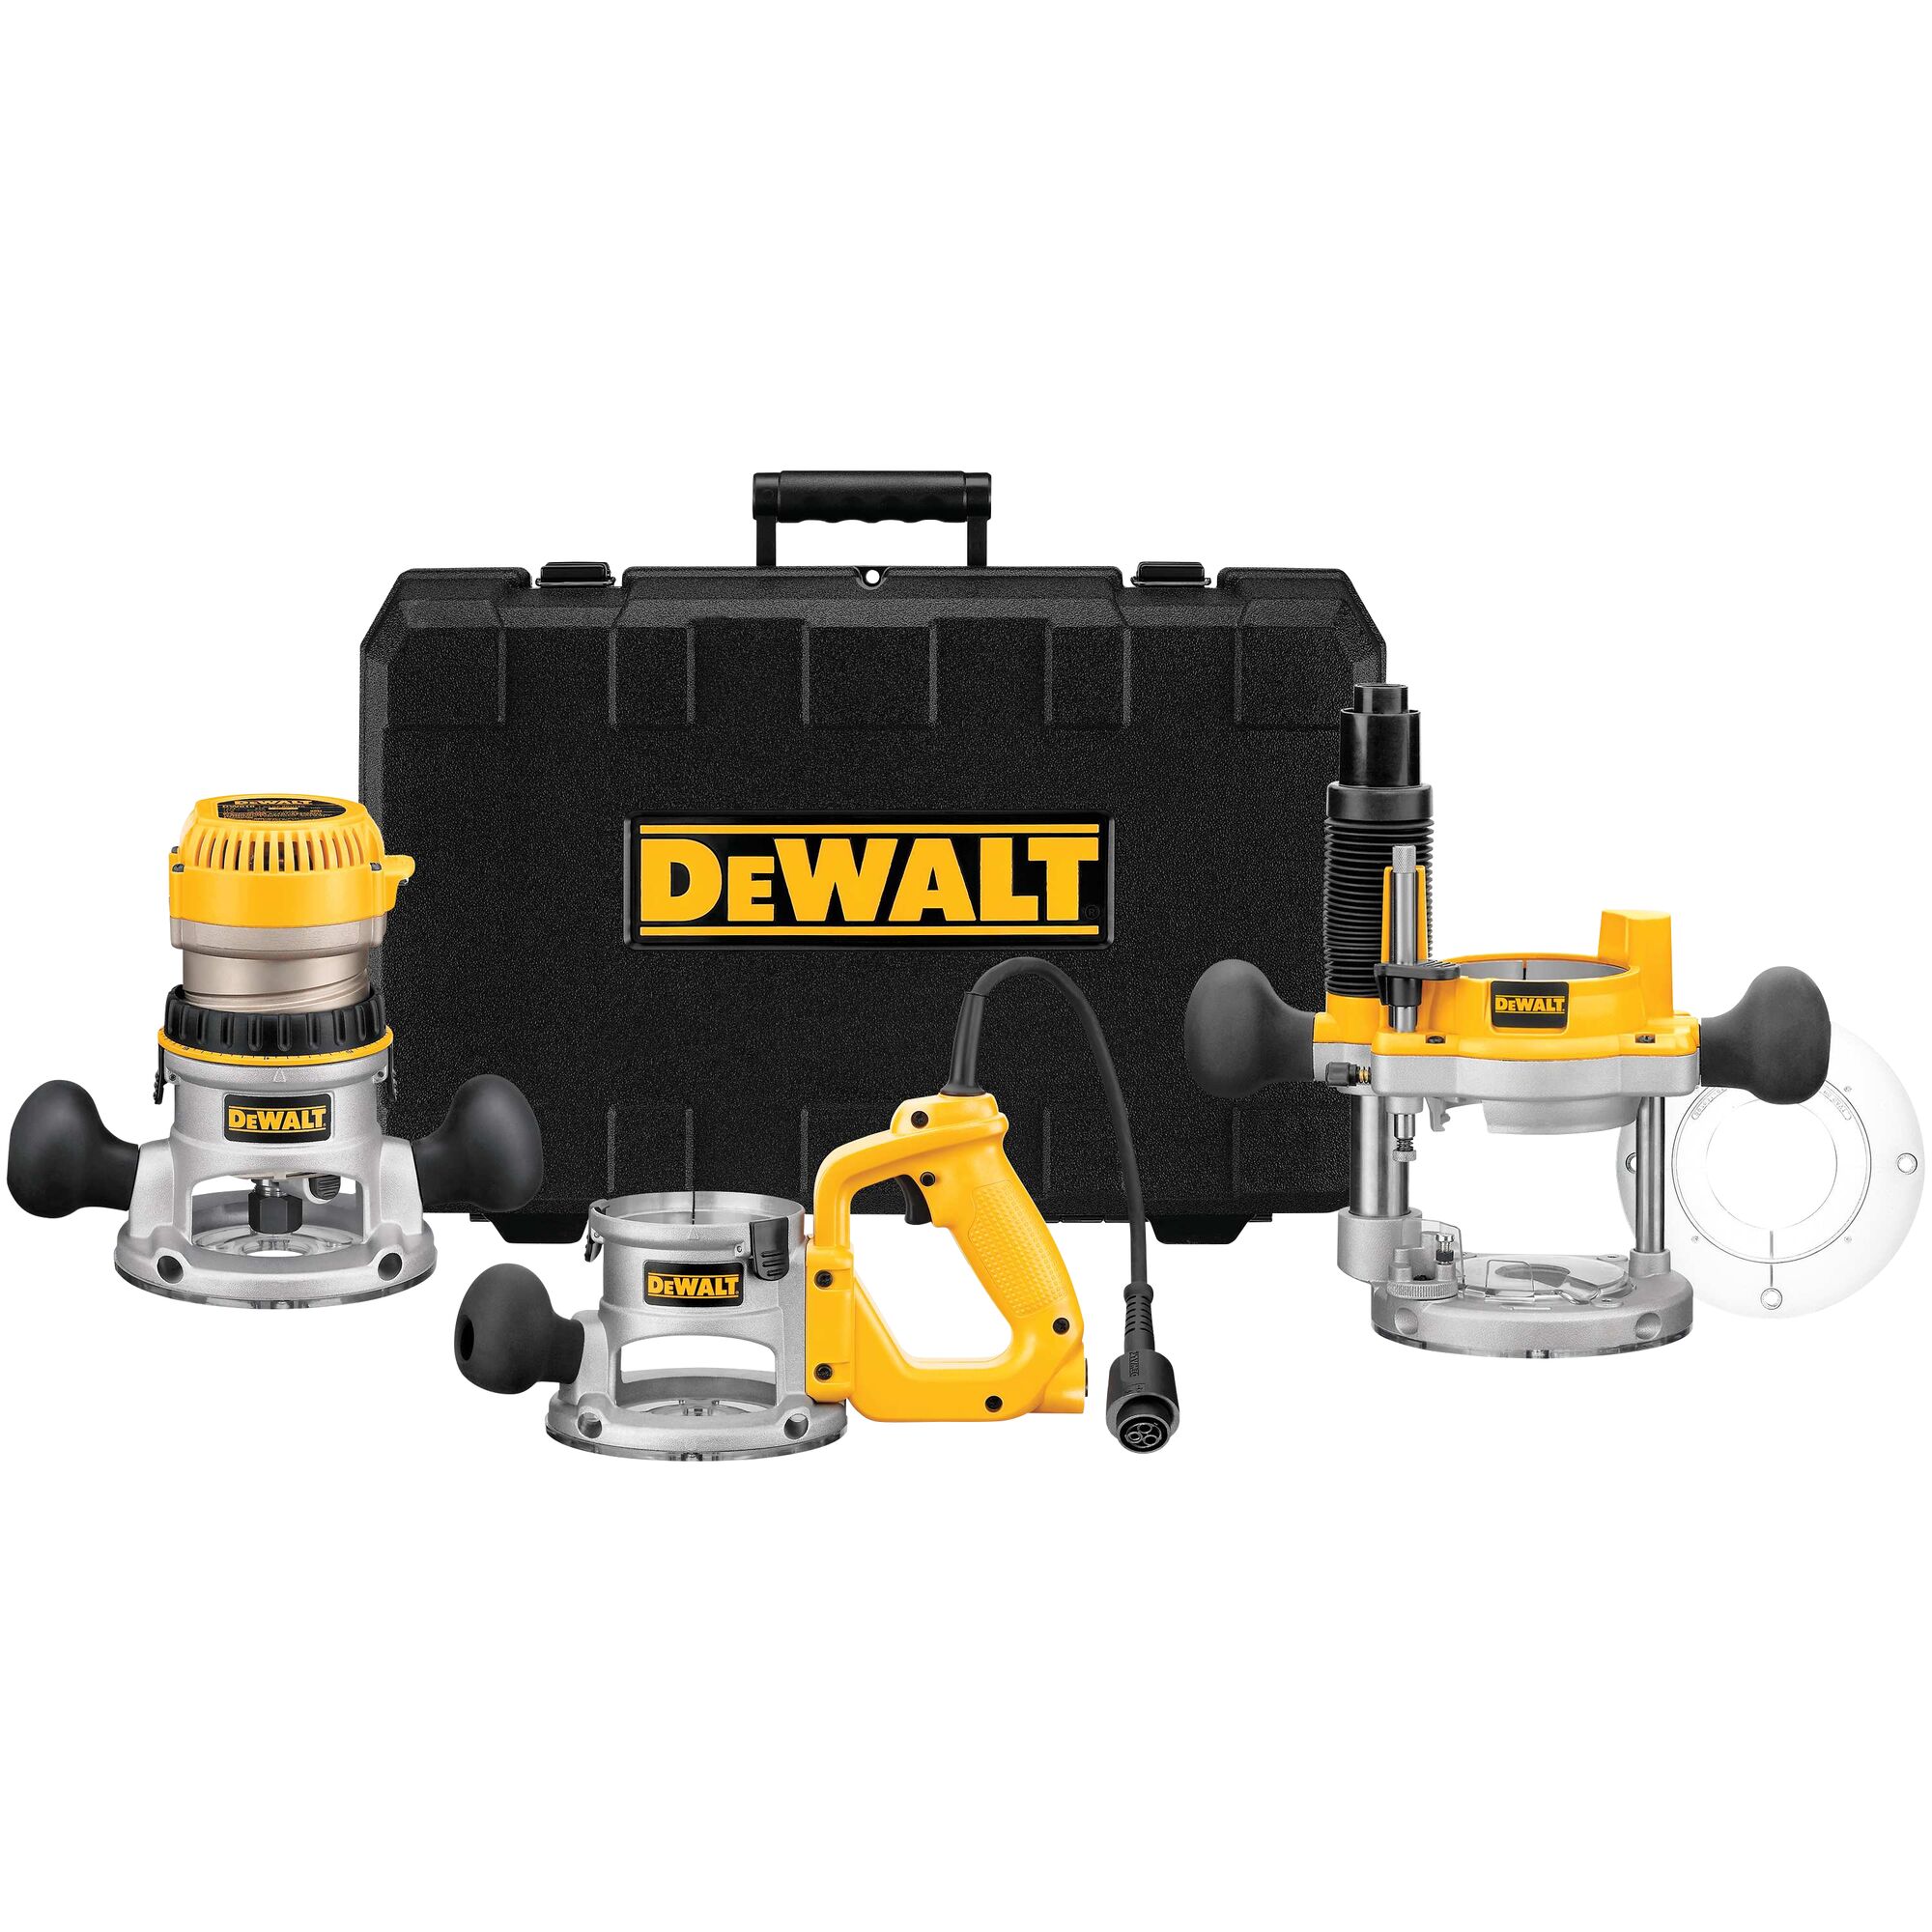 DEWALT DEWALT DW618PKB 2-1/4 HP EVS Fixed Base/Plunge Router Combo Kit with  Soft Start with DW6913 Router Edge Guide with Fine Adjustment and Vacuu 